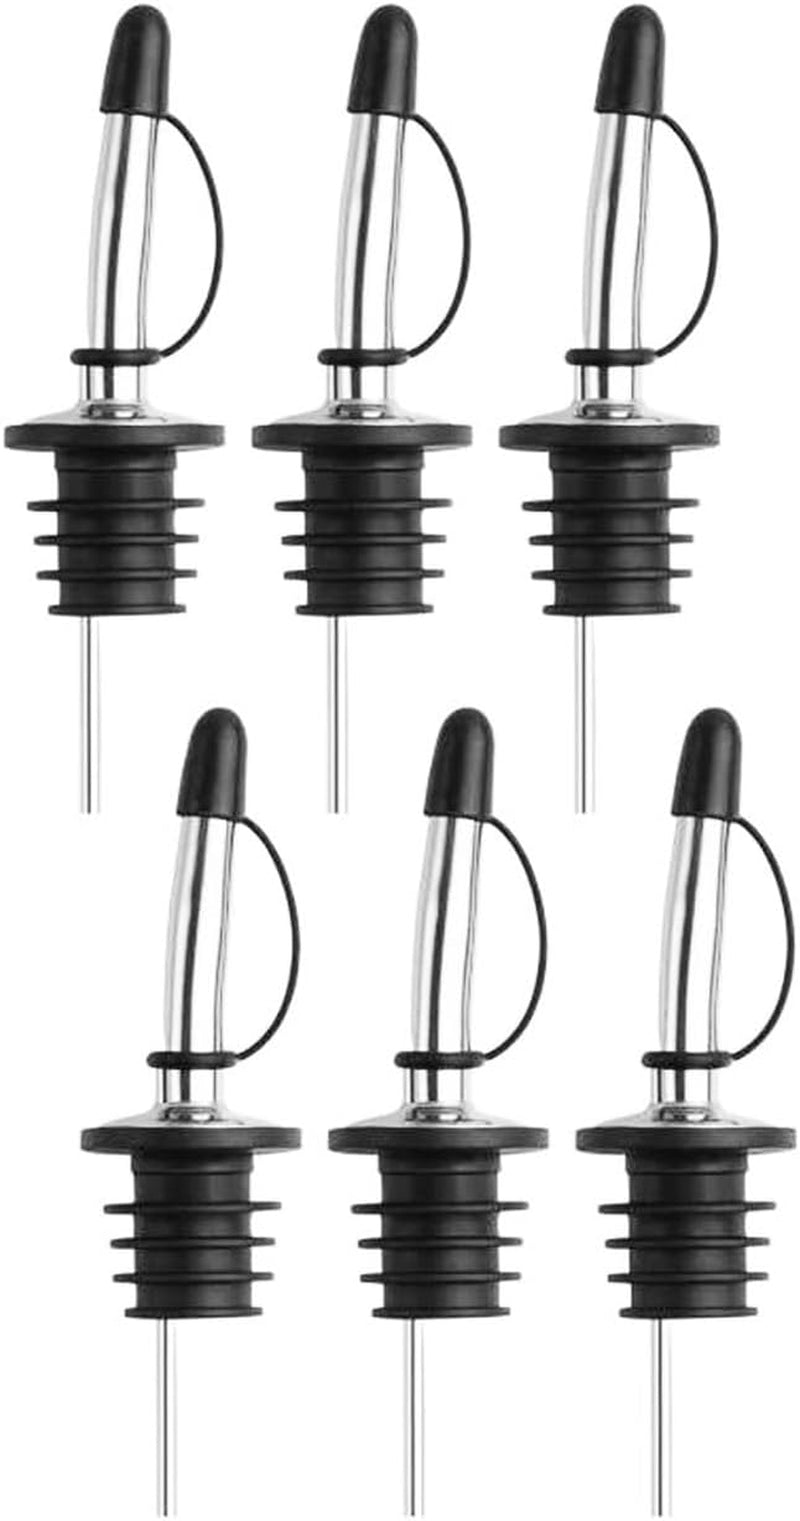 12-Pack Premium Stainless Steel Classic Tapered Spout Bottle Pourers with Rubber Dust Caps - Ideal for Standard Sized Liquor, Wine, Coffee, Syrup, Vinegar, Snow Cone and Olive Oil Bottles